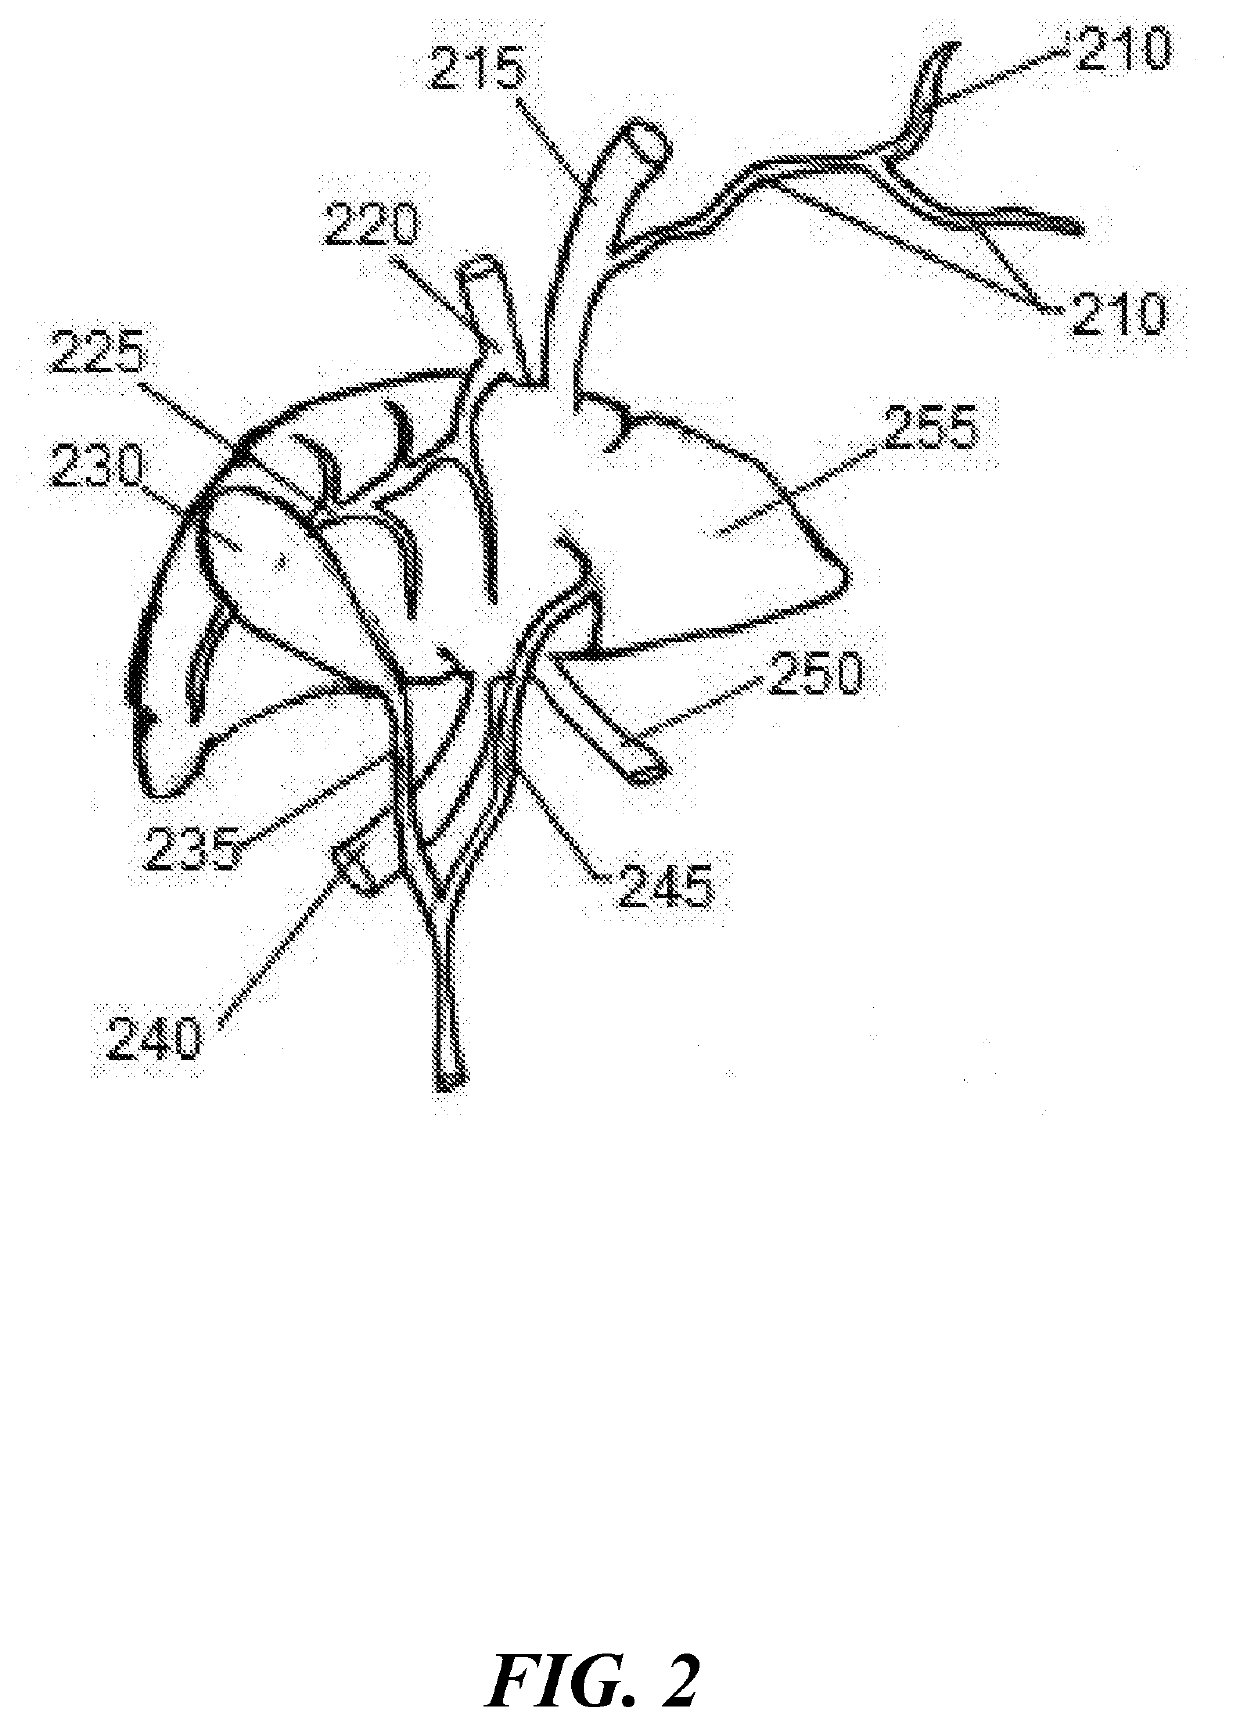 Tissue specific markers for preoperative and intraoperative localization and visualization of tissue